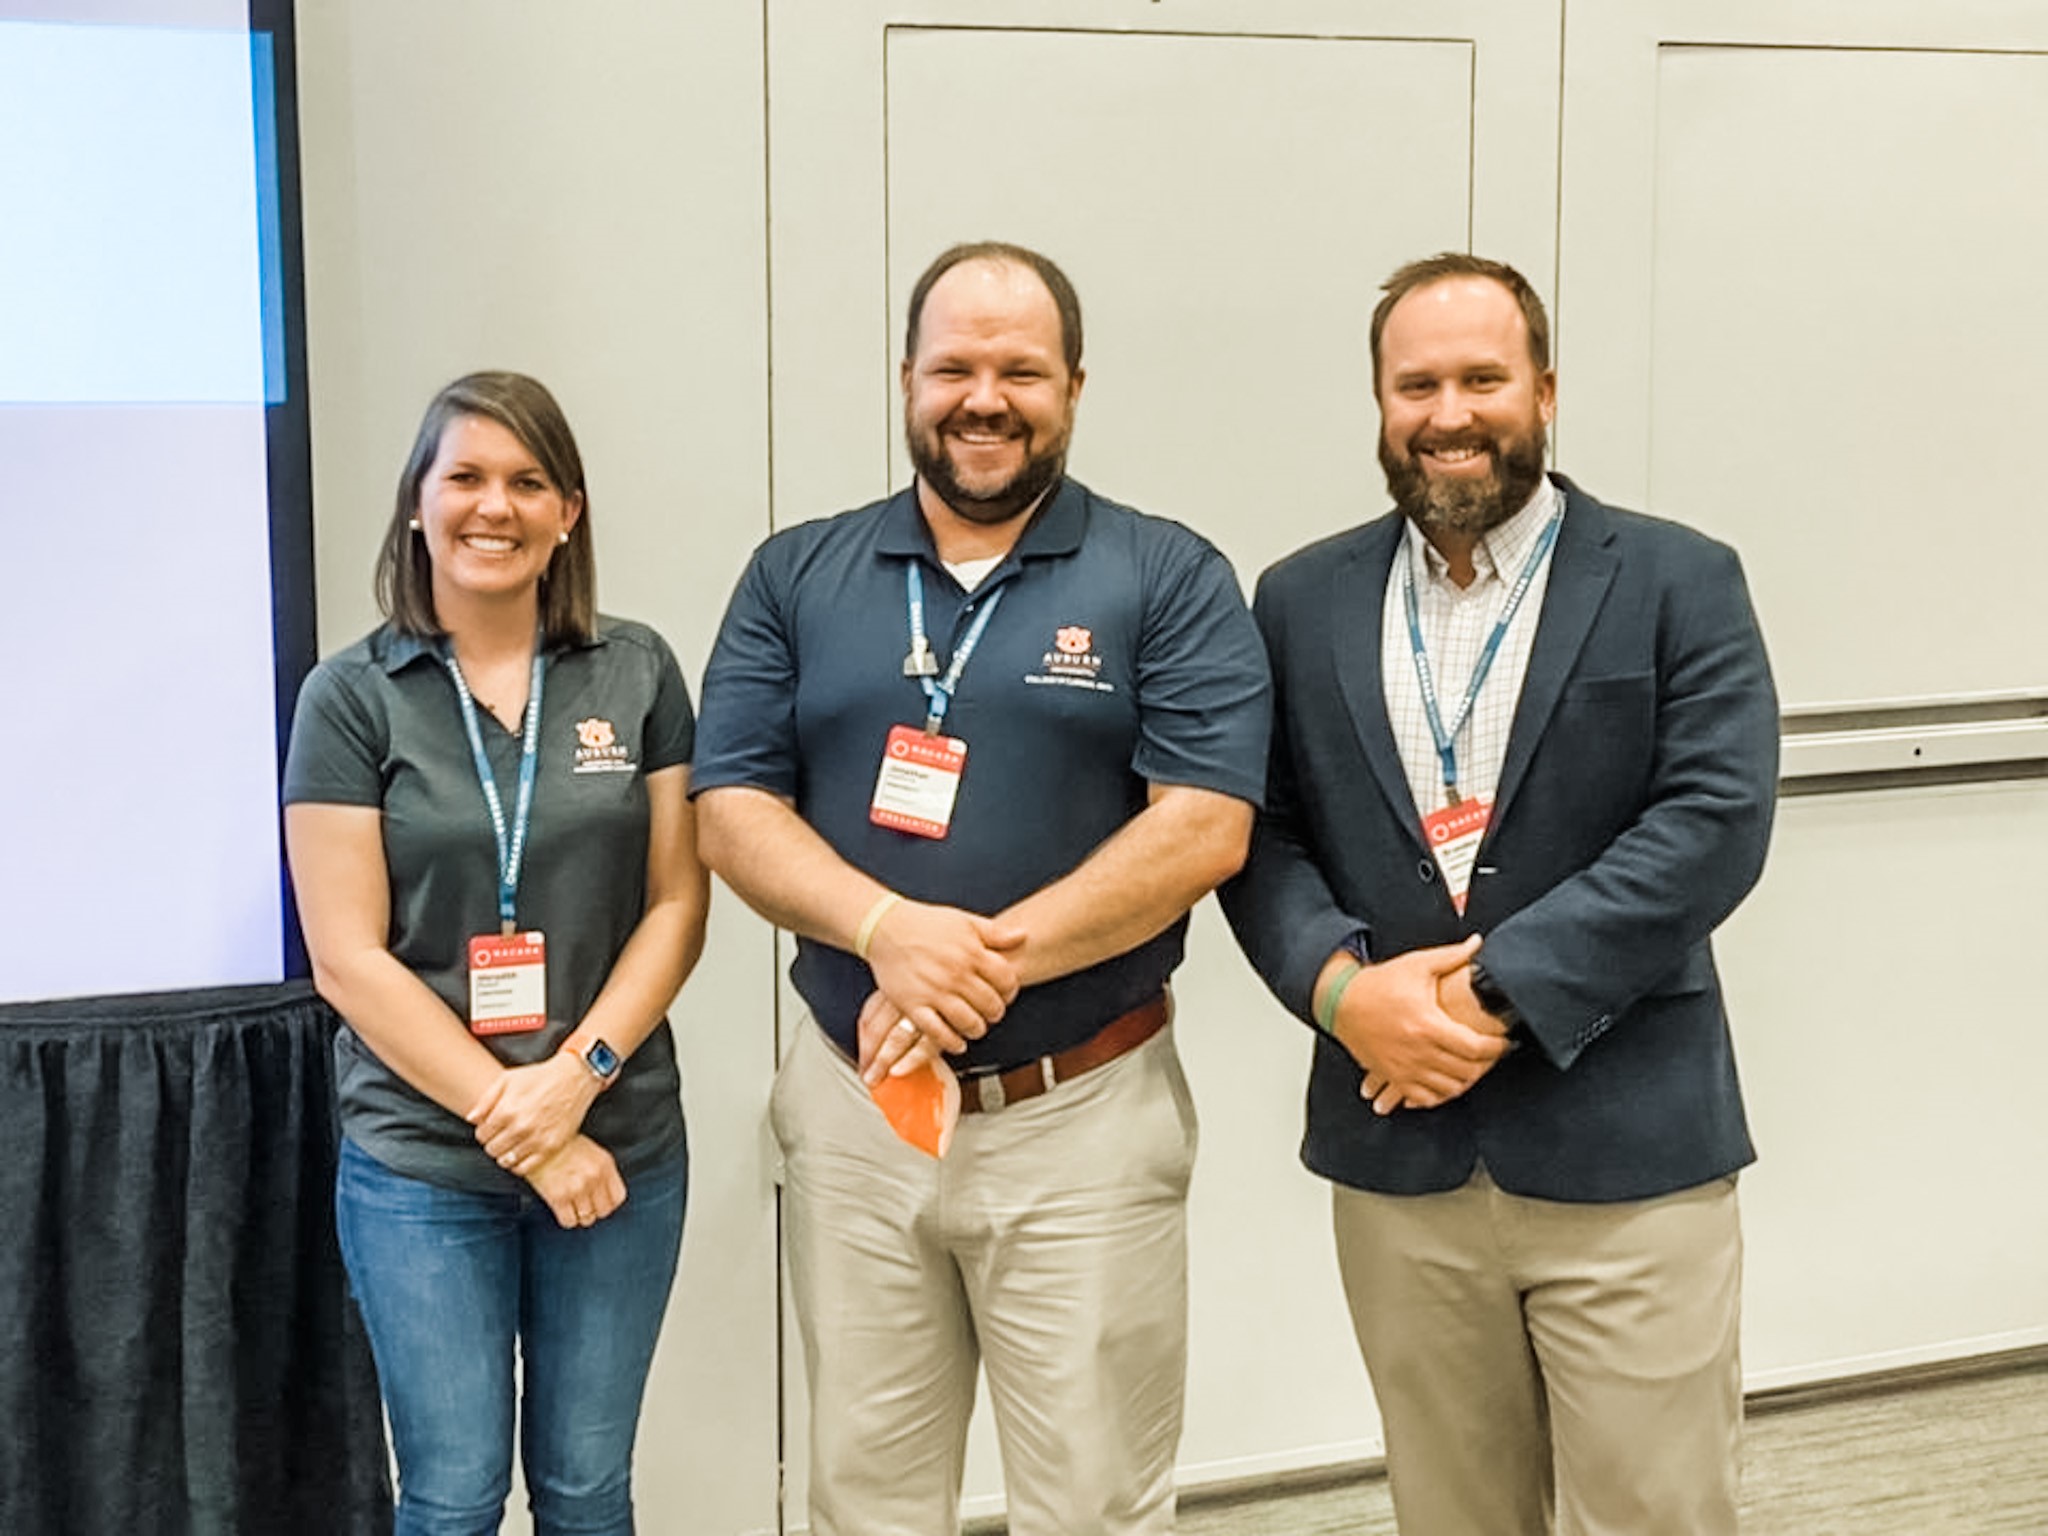 (L to R): The Advising 2 Bits podcast team of Meredith Powell, Jonathan Hallford and Branden Farmer presenting at the 2021 NACADA Annual Conference in Cincinnati, OH.